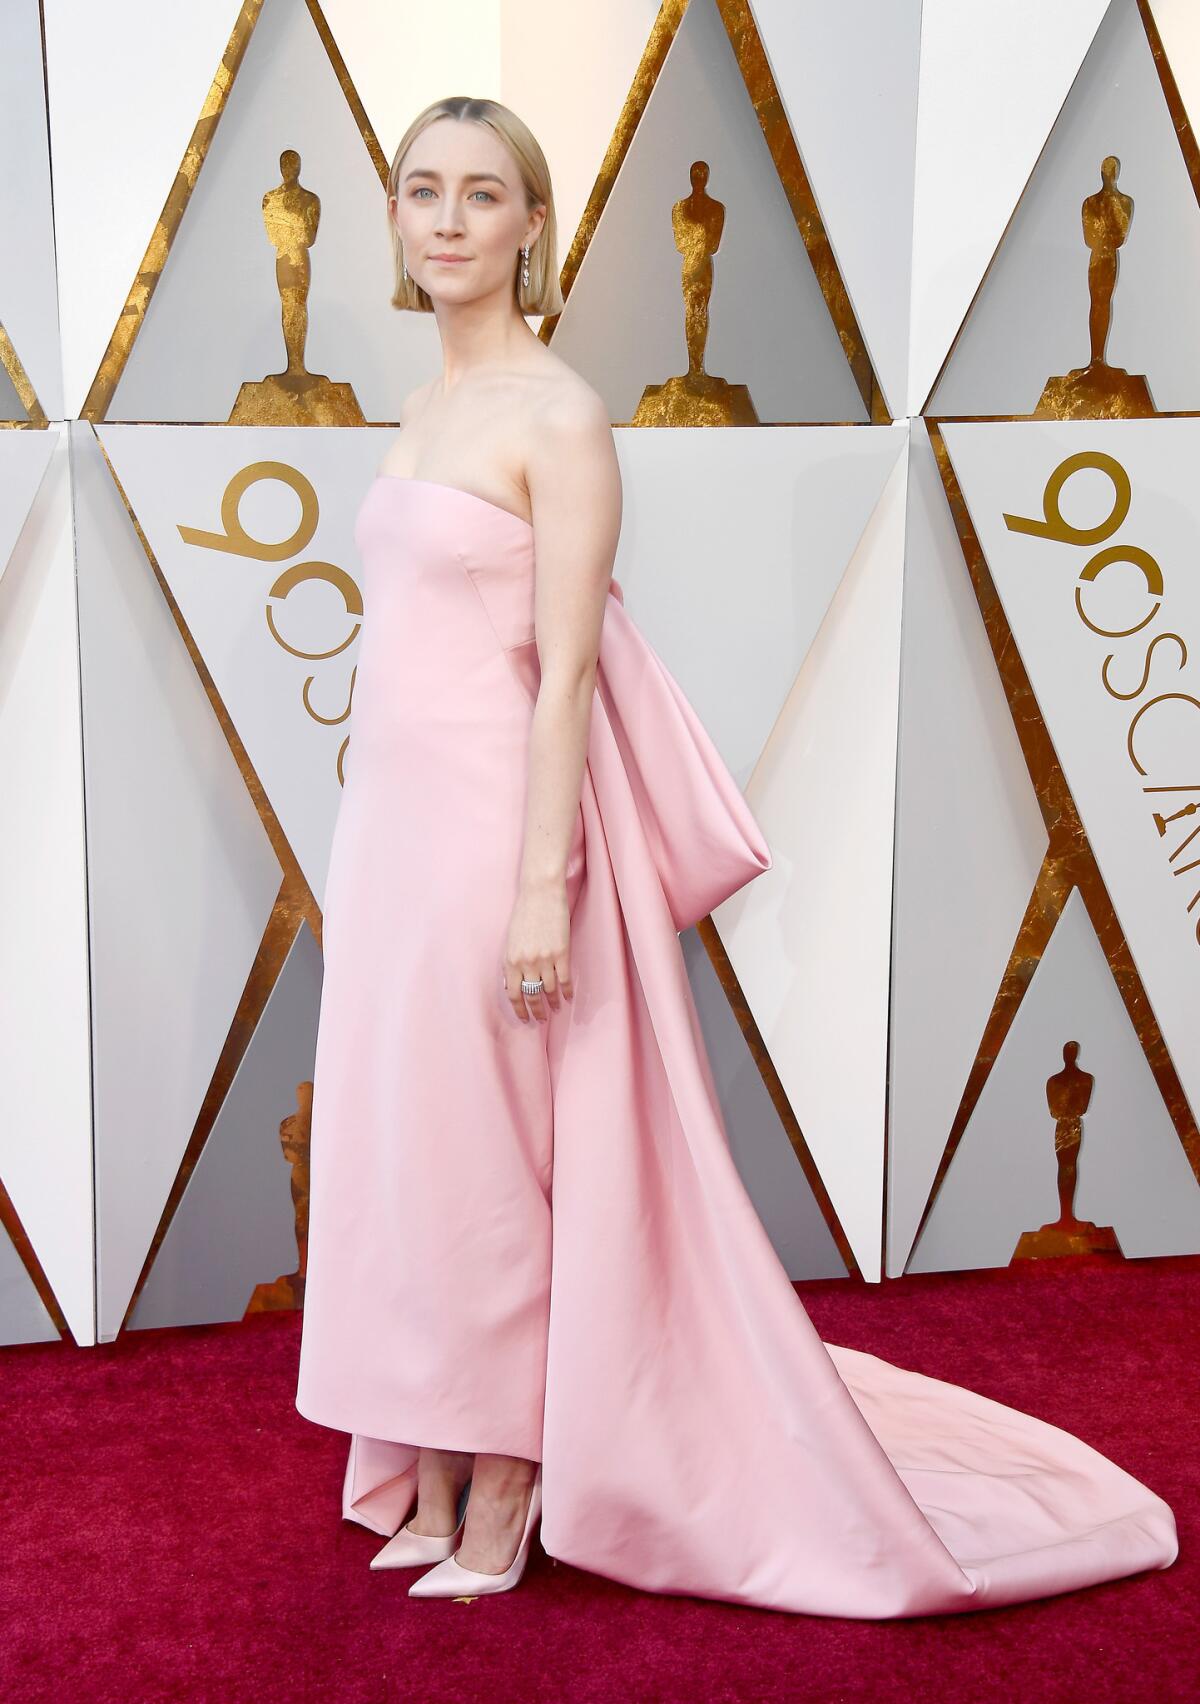 Actress Saoirse Ronan in a Calvin Klein By Appointment gown at the 90th Academy Awards in Los Angeles on March 4, 2018.